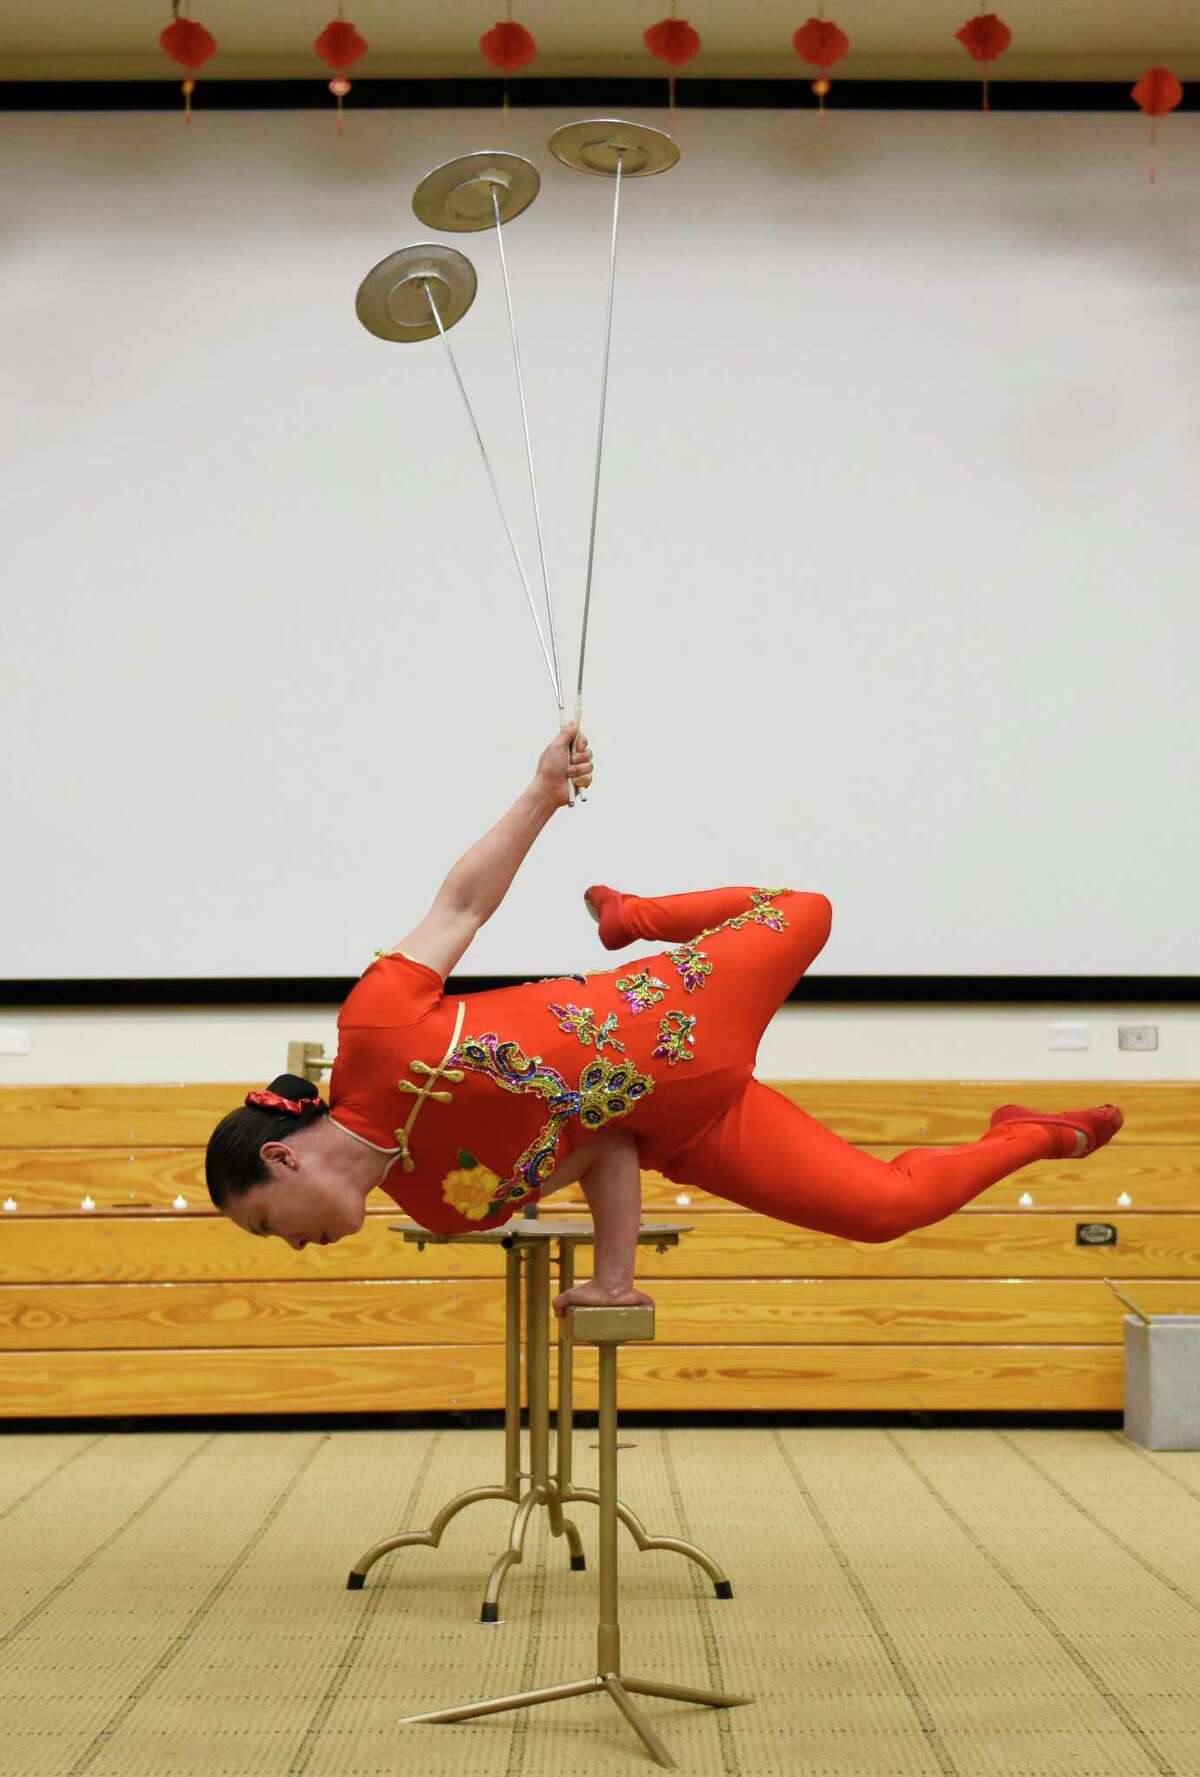 Chinese acrobat Li Liu performs during the Lunar New Year celebration at the Ferguson Library in Stamford, Conn.  Sunday, Feb.  13, 2022. Presented in partnership with Traditional Martial Arts and Club Kung Fu, the event celebrated the Year of the Tiger with activities including a Chinese acrobatic performance and Tae Kwon Do and Wing Tsun Martial Arts demonstrations.